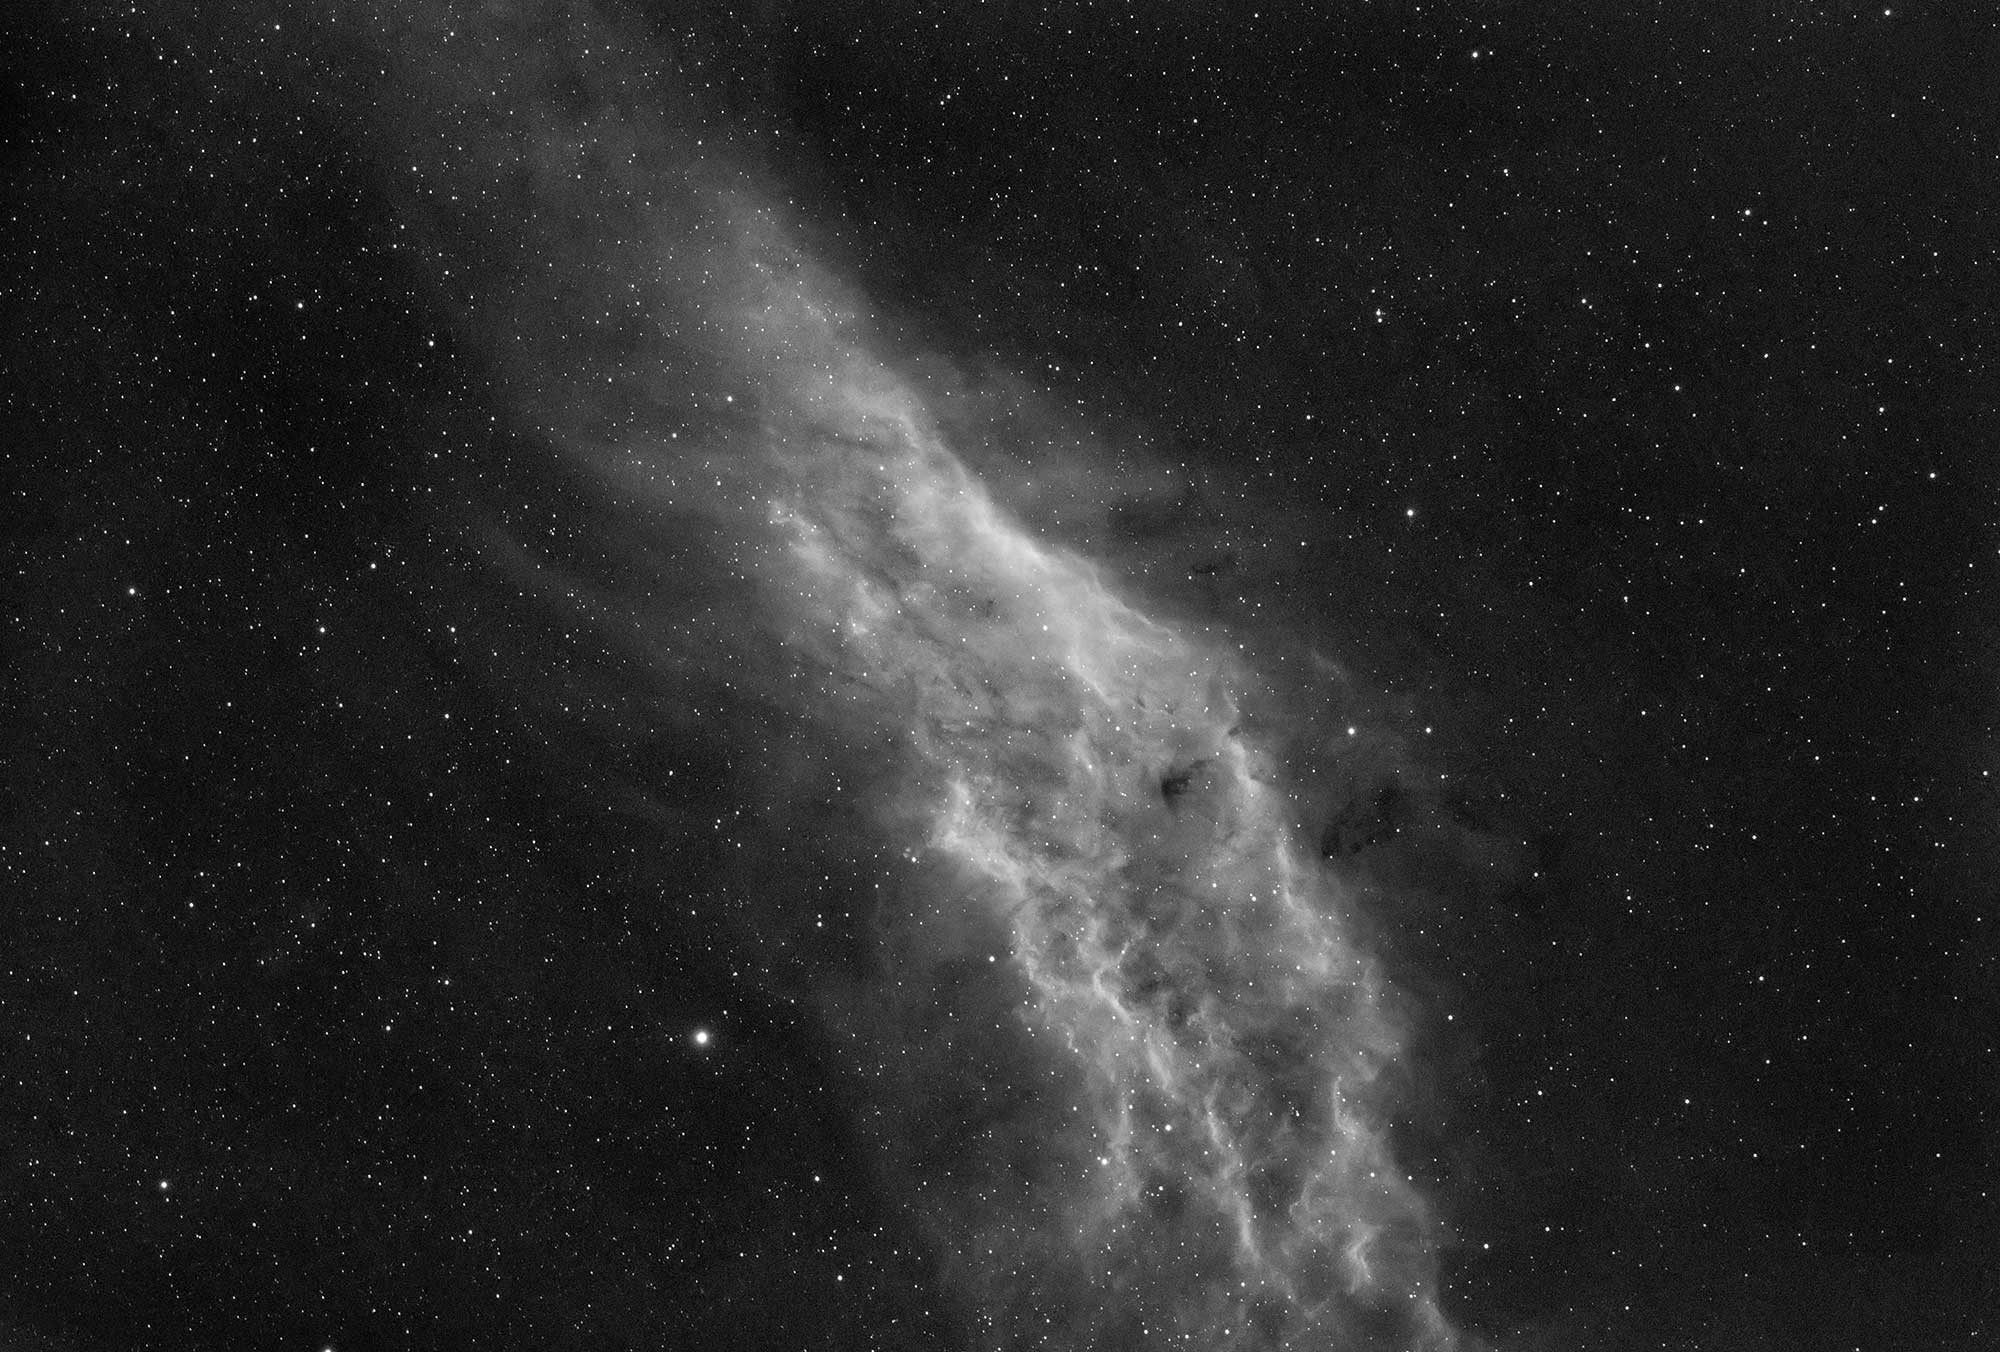 California Nebula in hydrogen alpha using the Borg55fl - 2 hours of total integration time